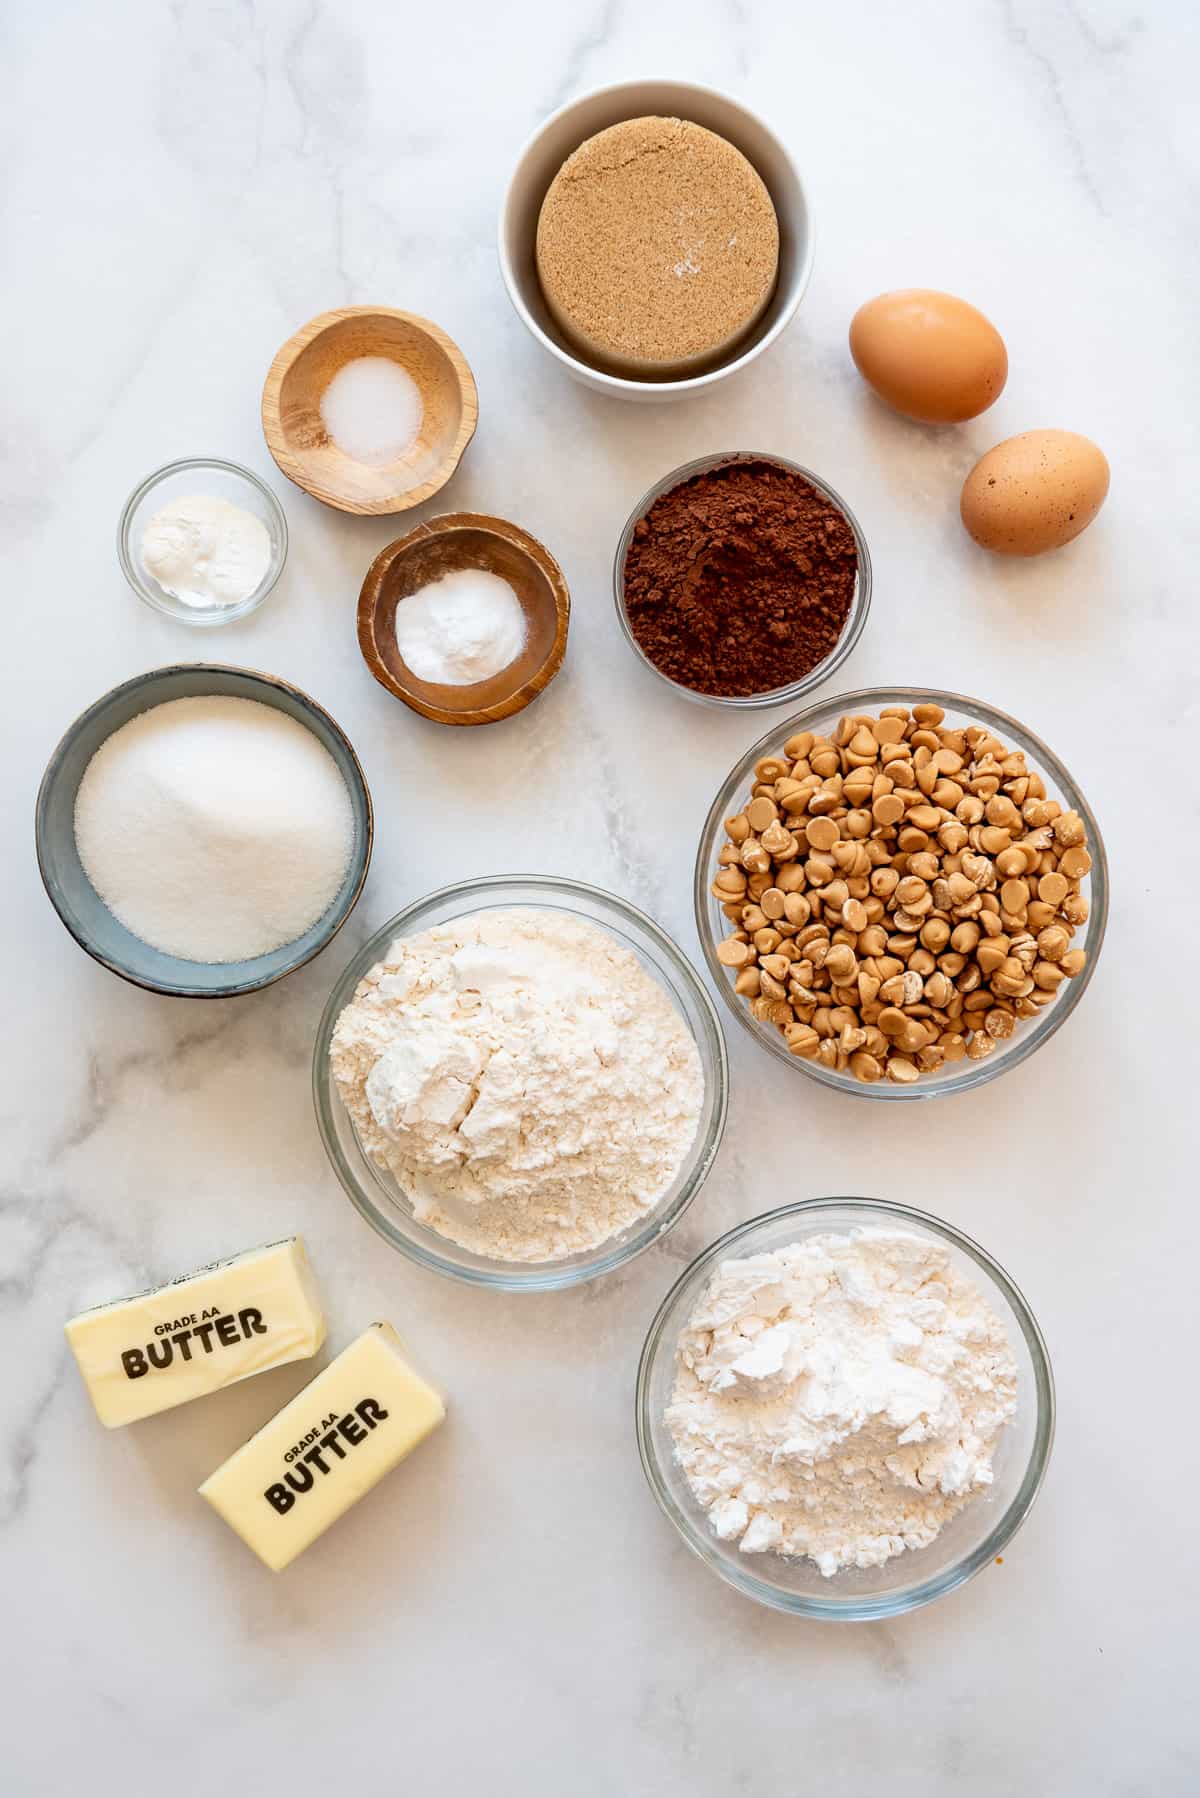 Ingredients for making chocolate cookies with peanut butter chips in separate bowls on a white surface.